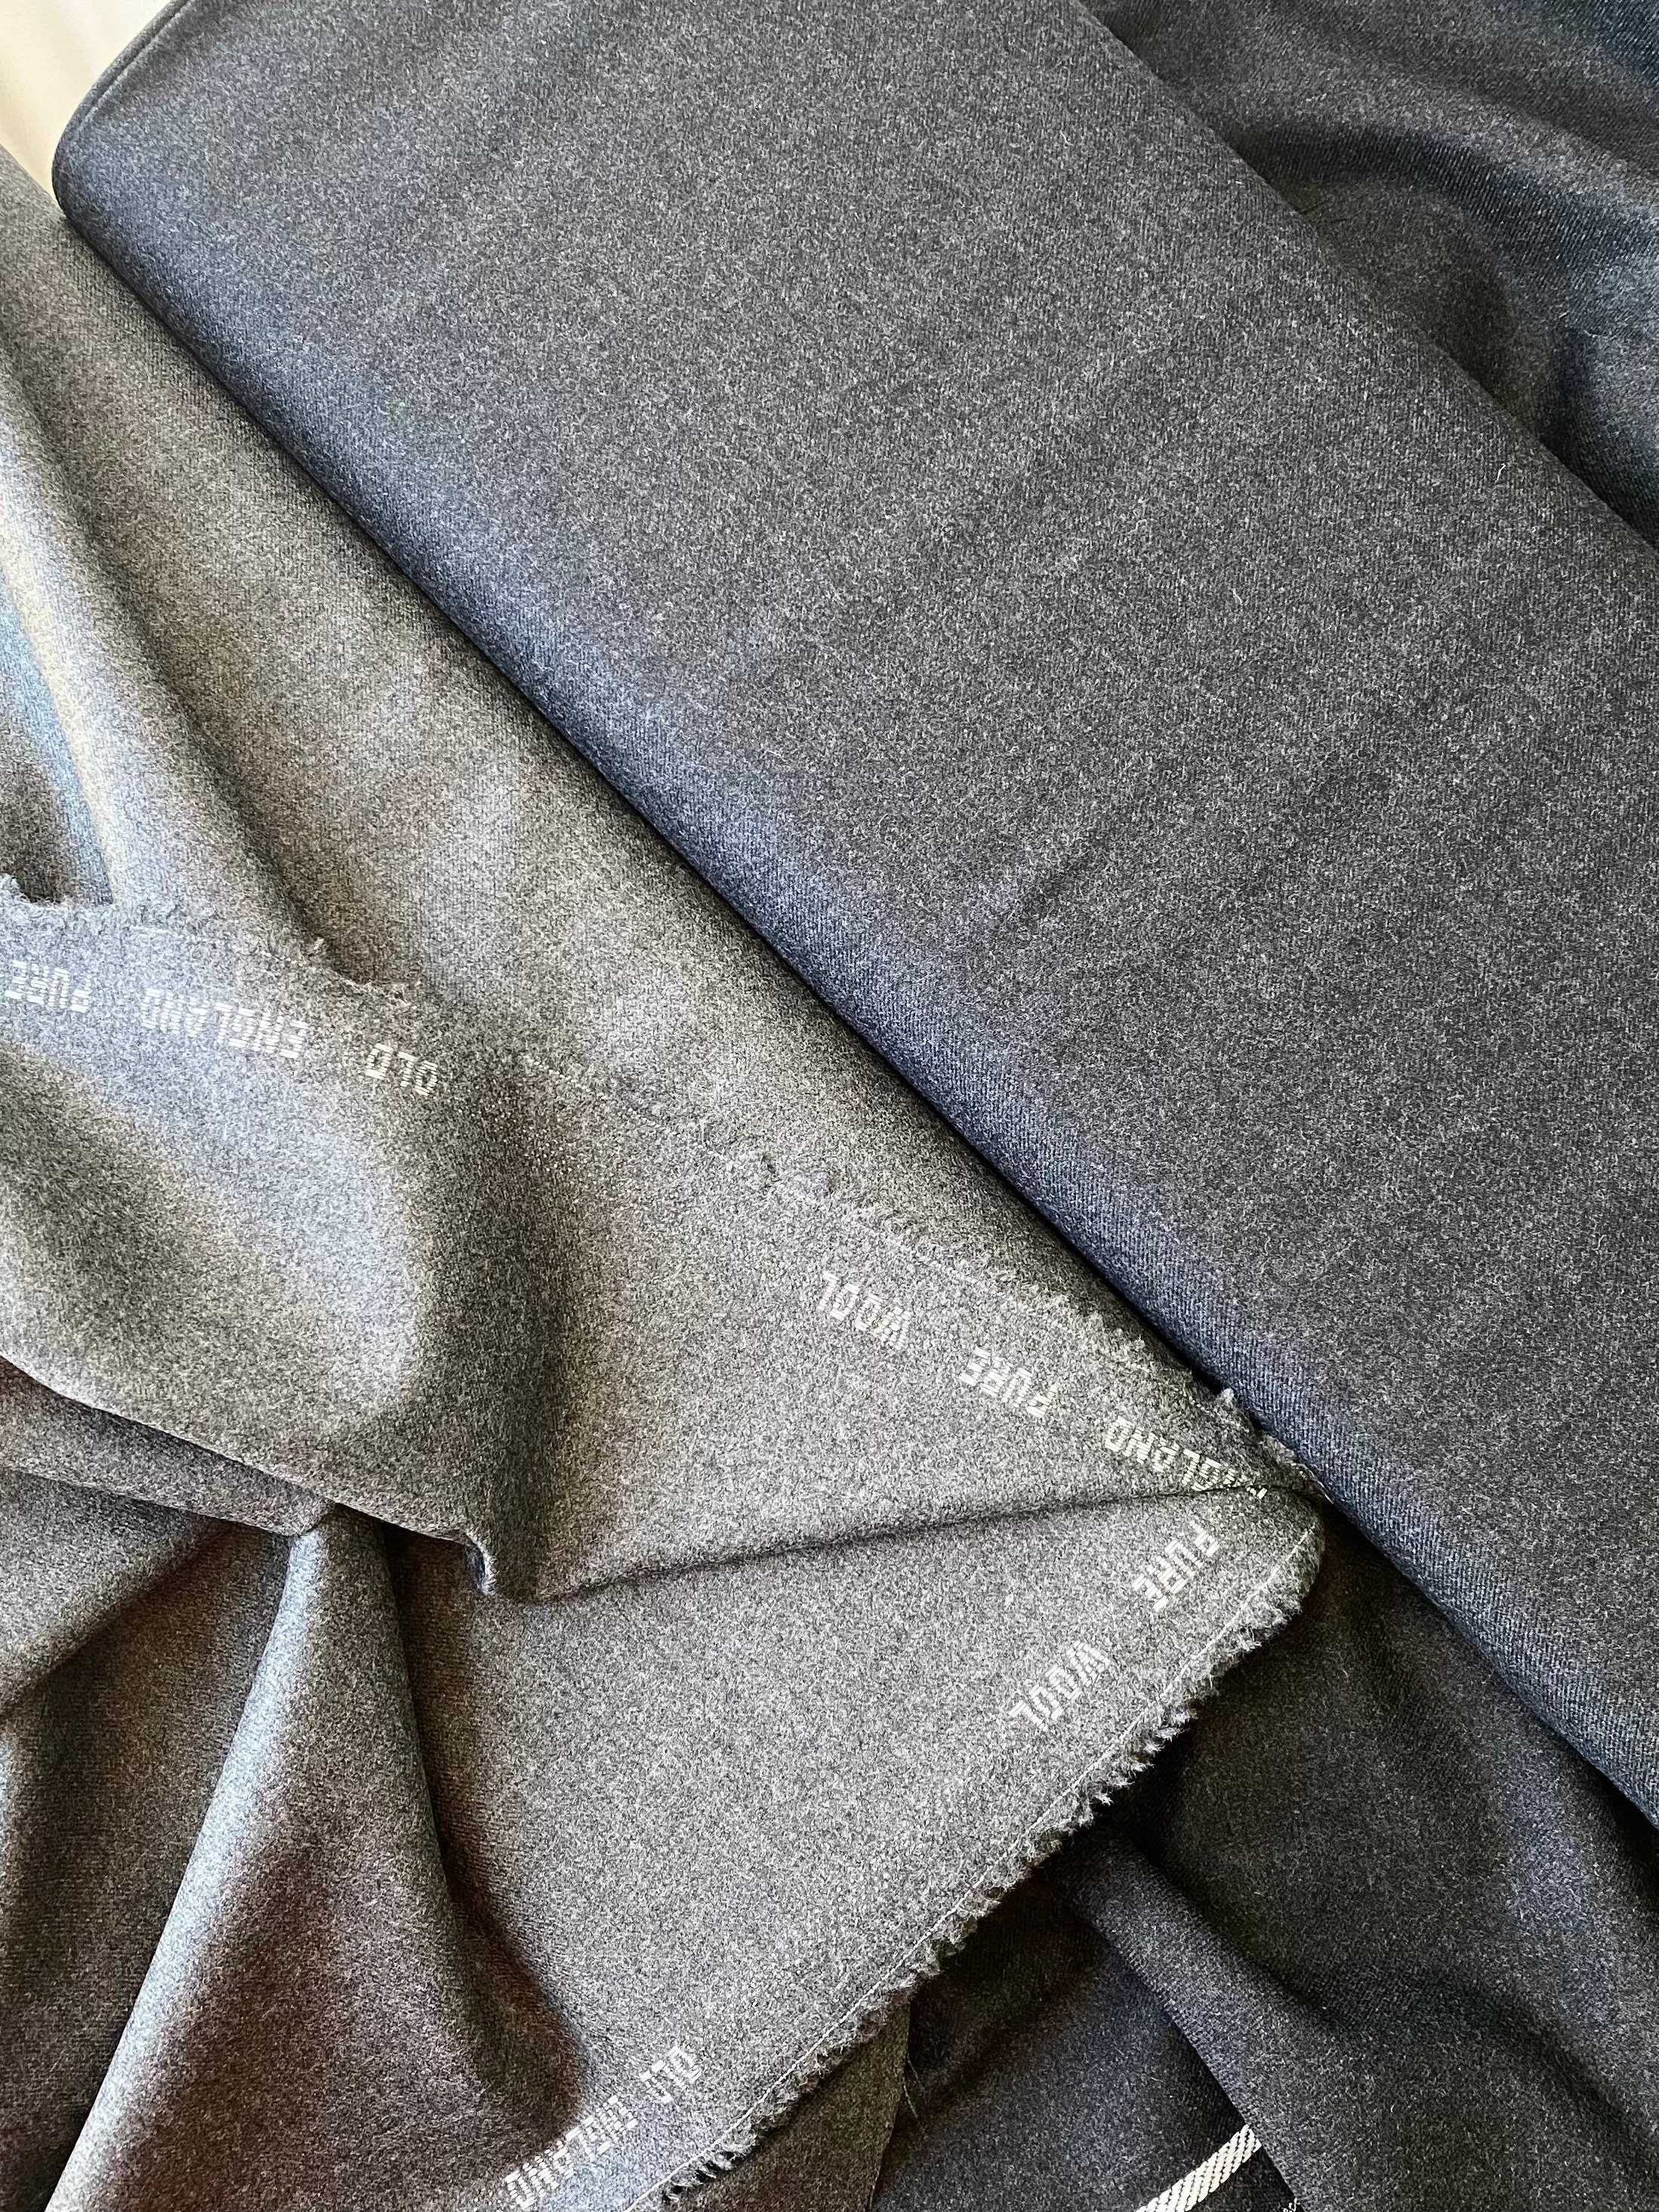 pure wool suiting fabric solid wool| Alibaba.com